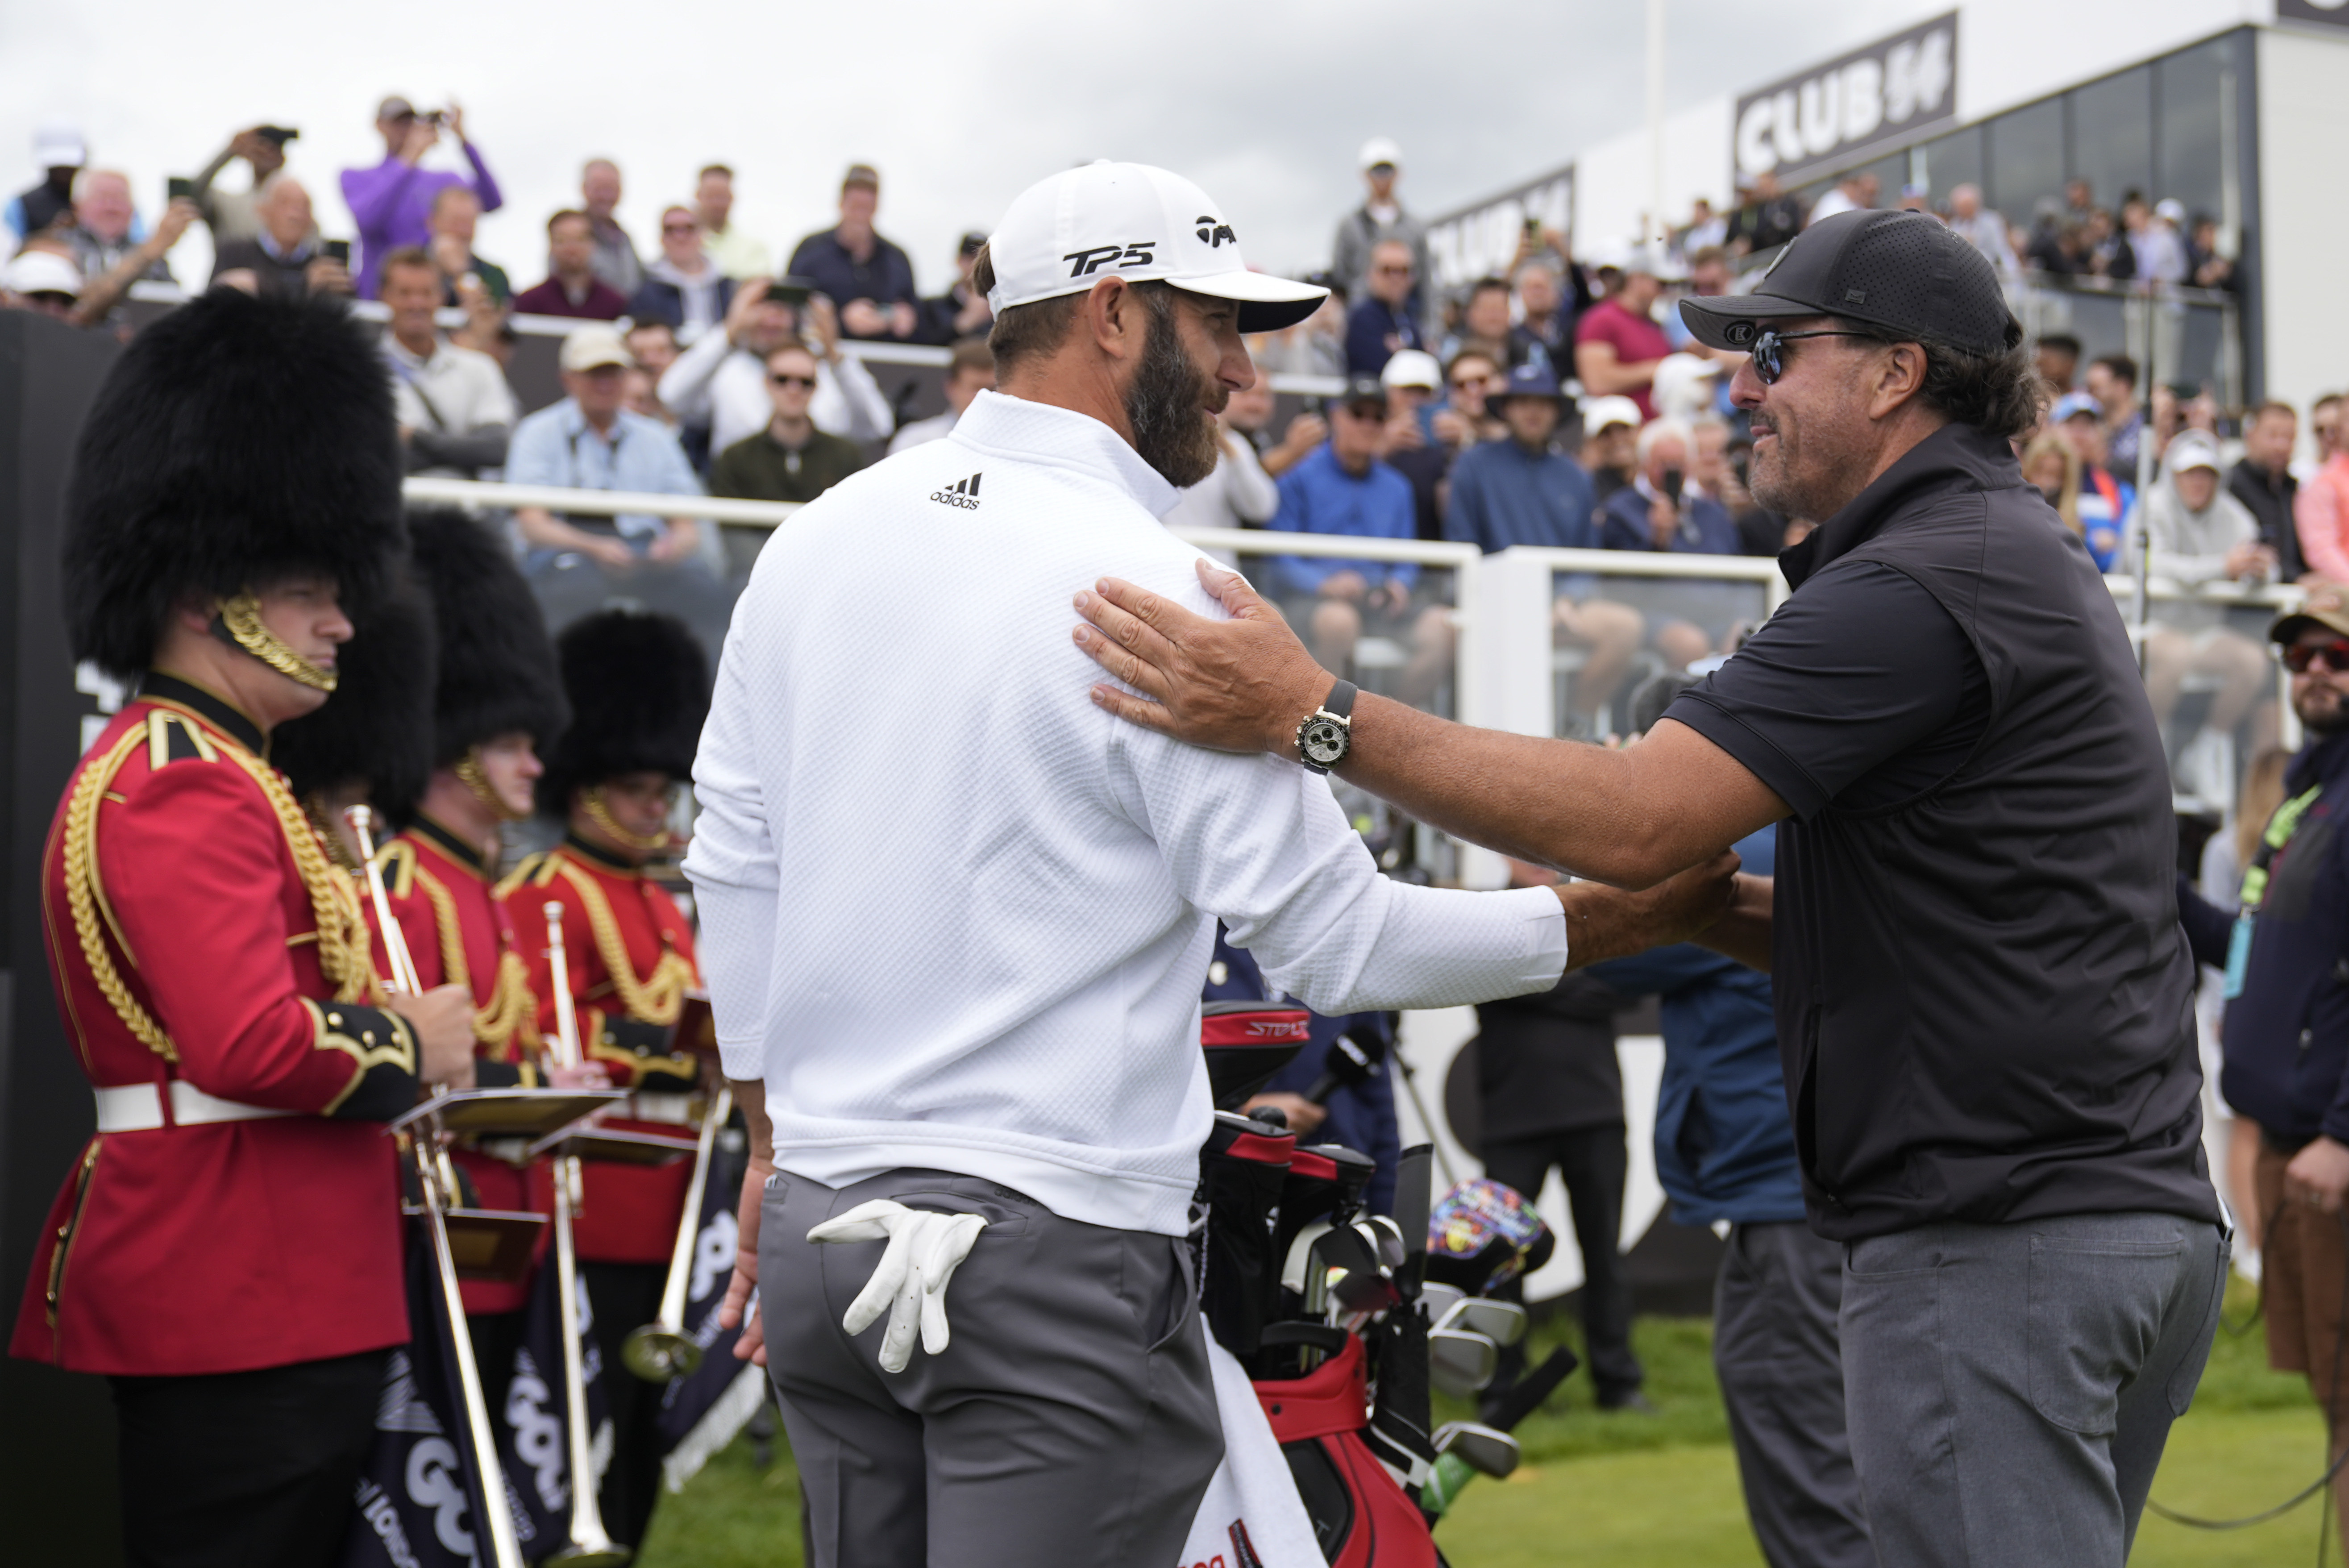 LIV Golf Invitational Series Day 2 FREE LIVE STREAM (6/10/22) Watch Phil Mickelson, Dustin Johnson at Centurion Club online Time, streaming, dates 